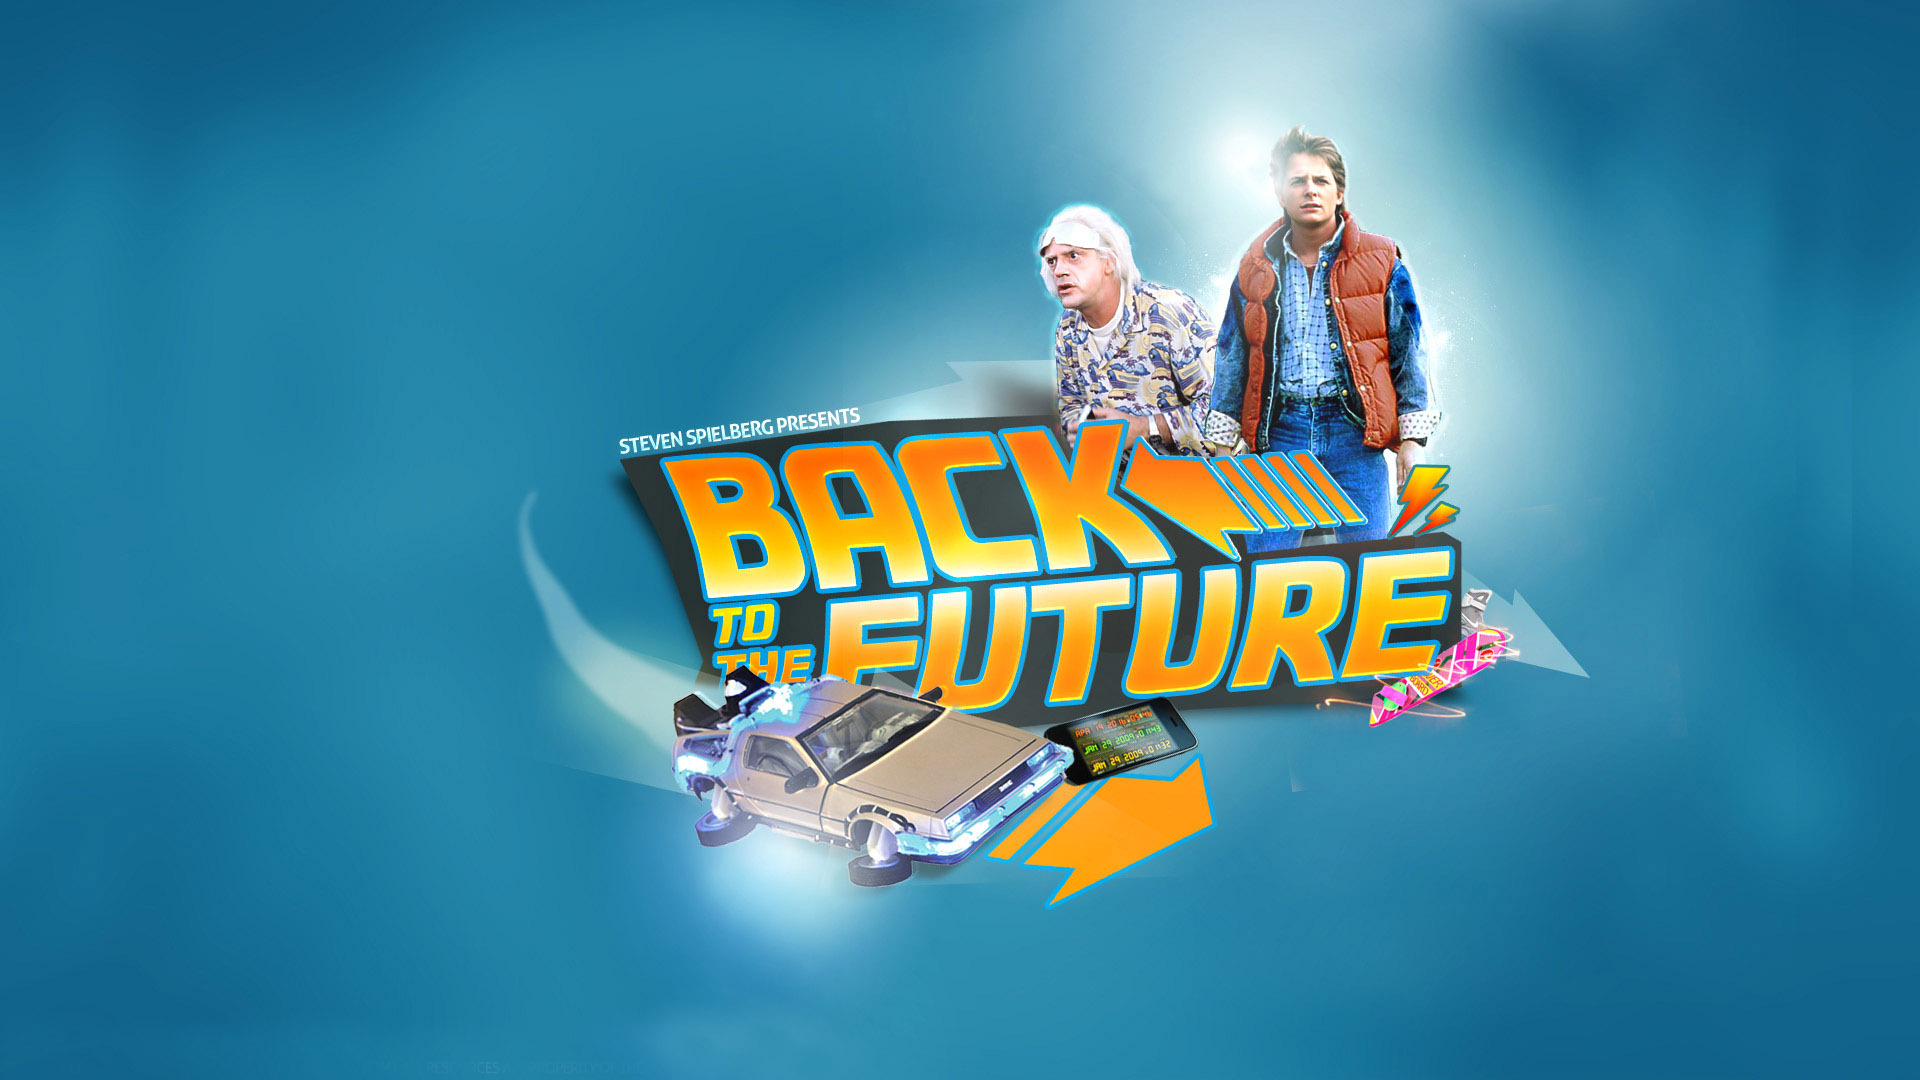 Back to the Future wallpaper 33918 1920x1080